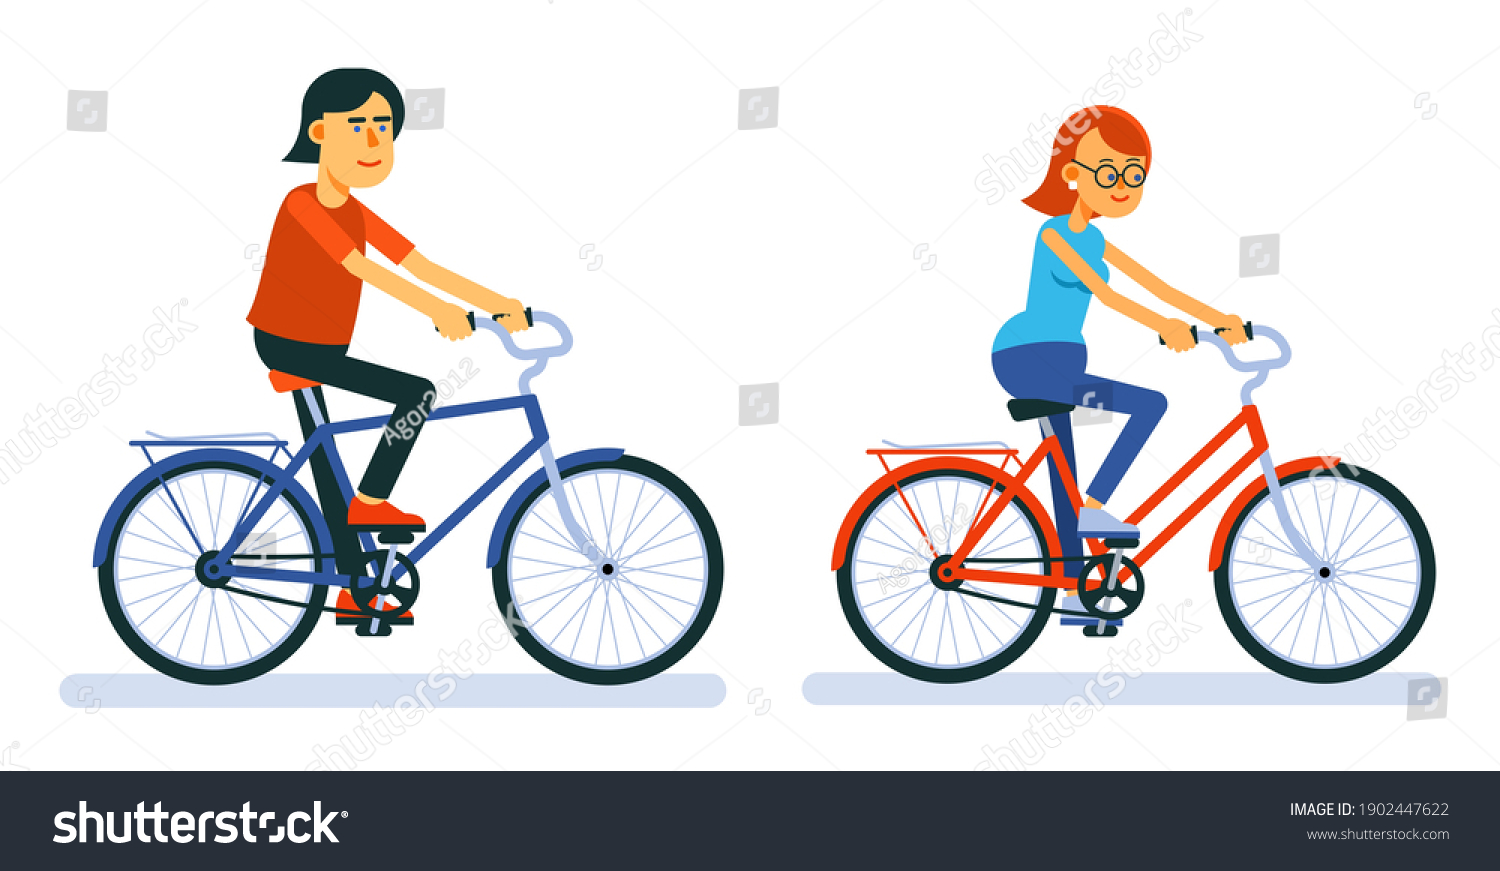 27,107 Cycling girl illustration Images, Stock Photos & Vectors ...